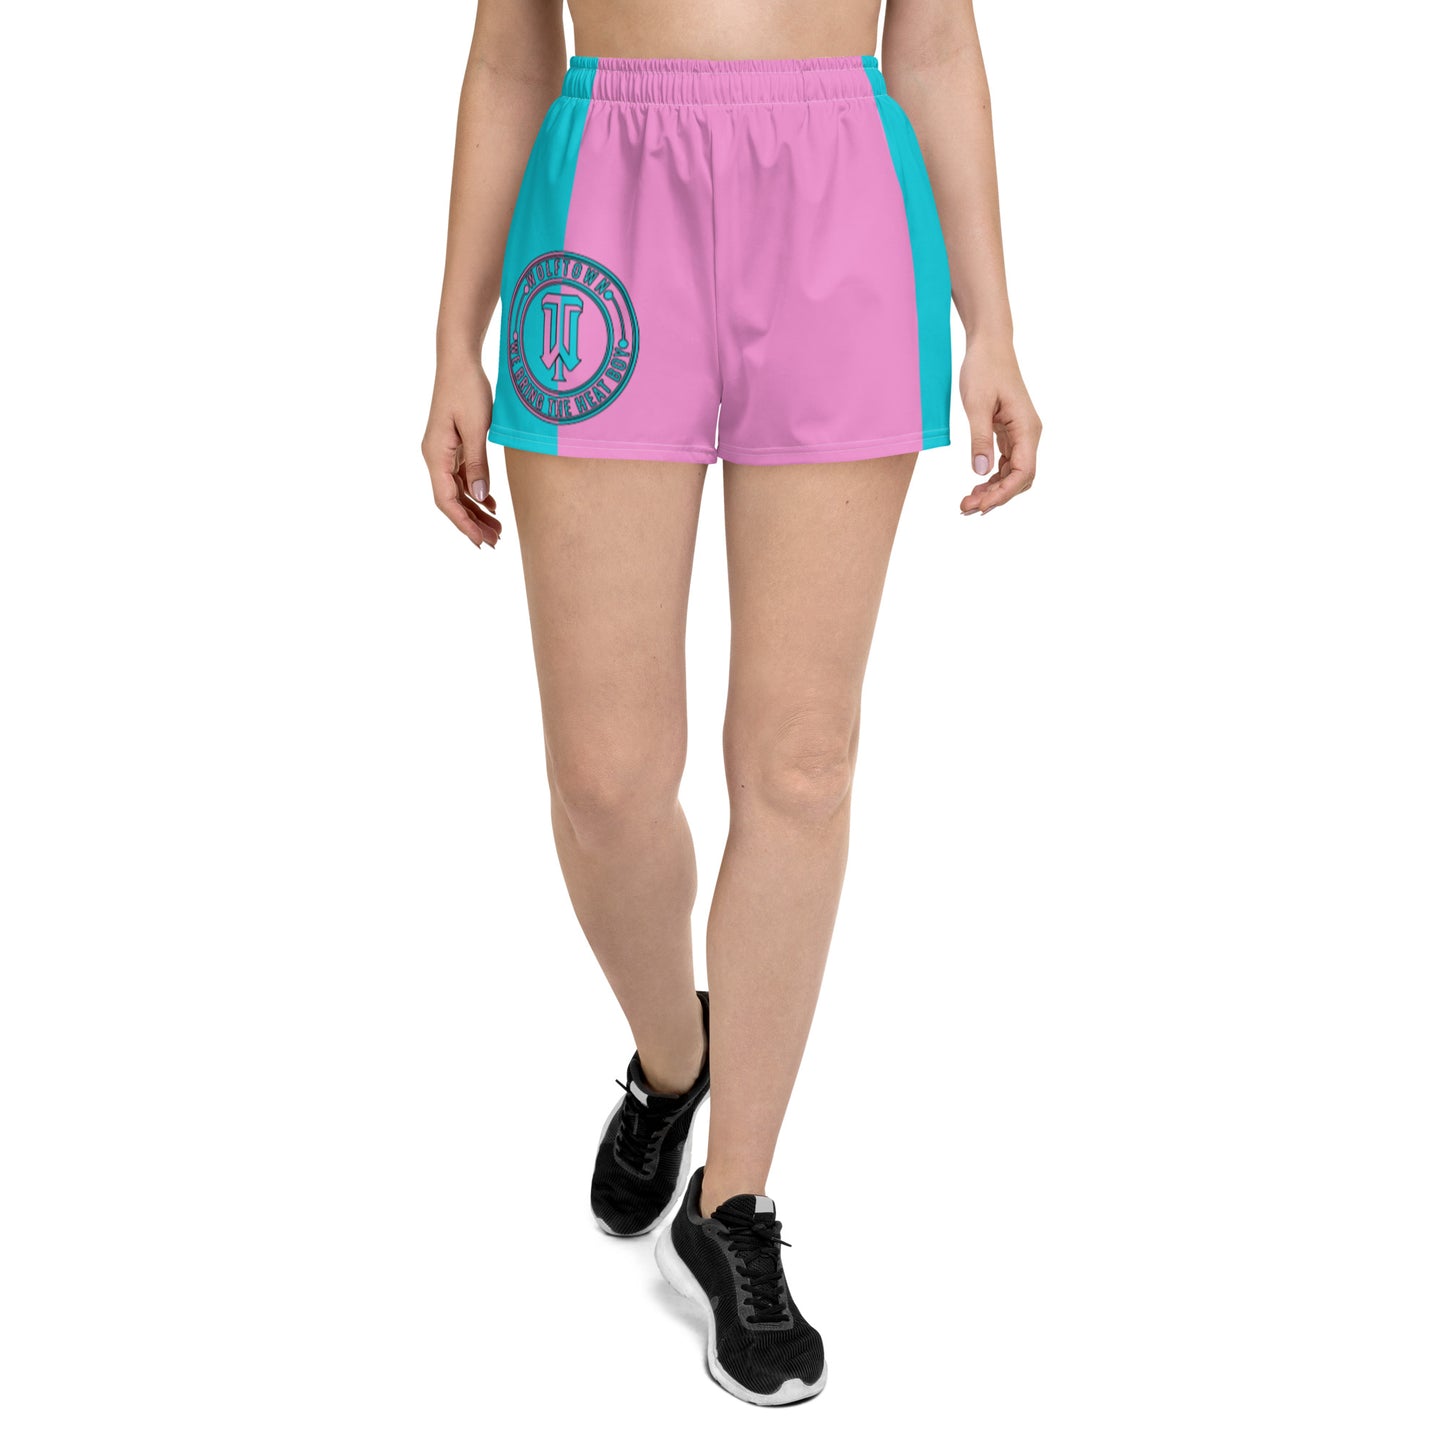 WOLFTOWN 'NEW DAY' (Women’s Athletic Shorts)